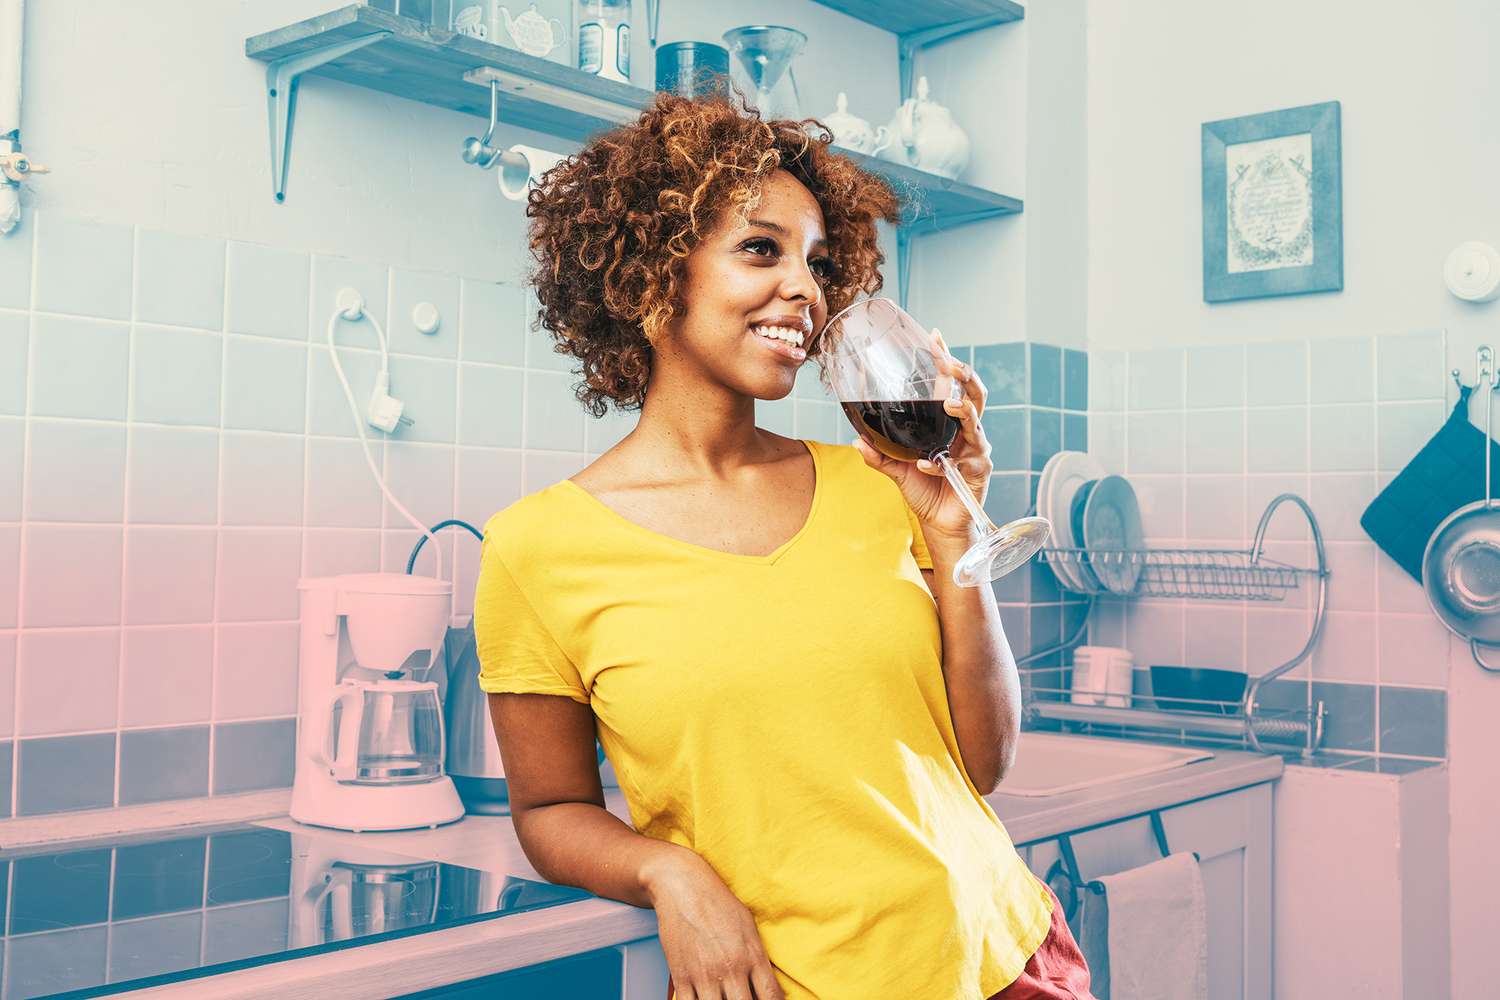 Smiling young woman drinking glass of red wine in kitchen